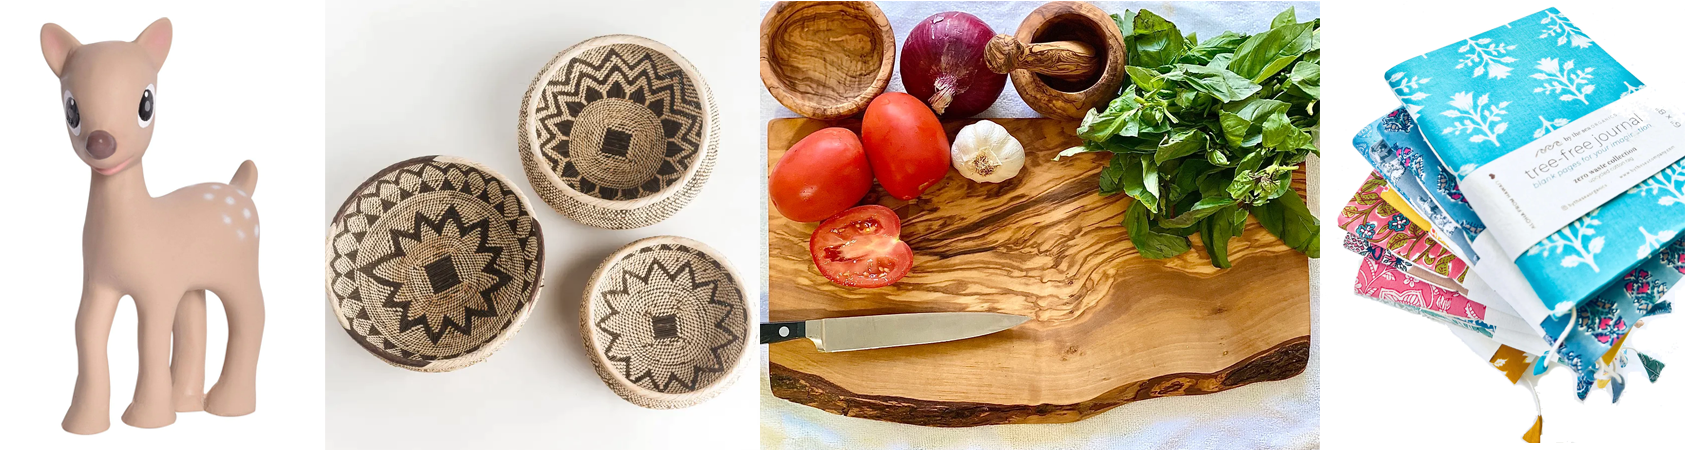 a series of photos including a reindeer teether, hand woven bowls, olivewood cutting board, upcycled tree free journal